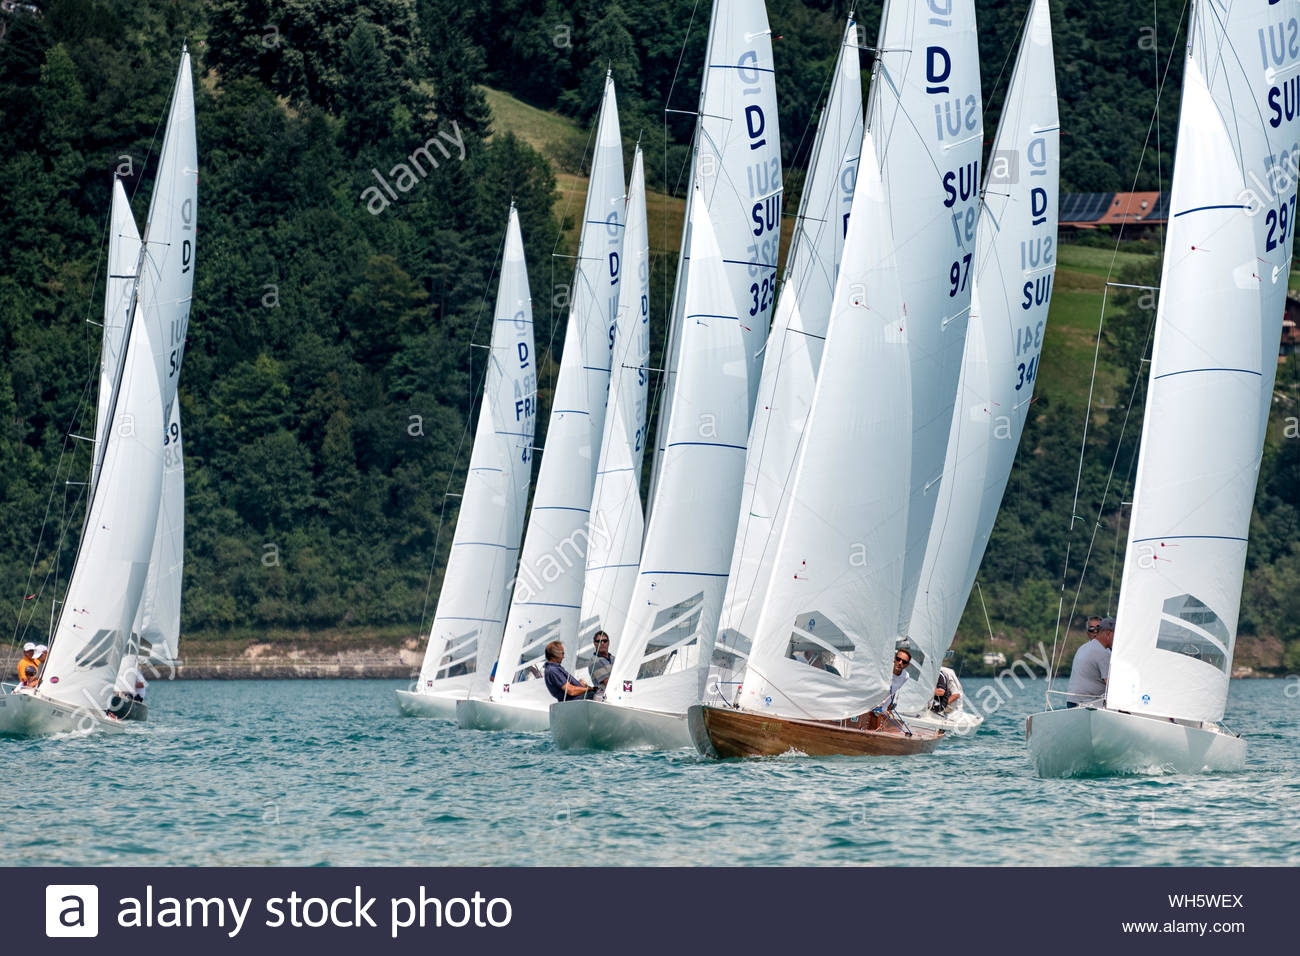  Drachen, Dolphin, Yngling  Cup  Thunersee YC